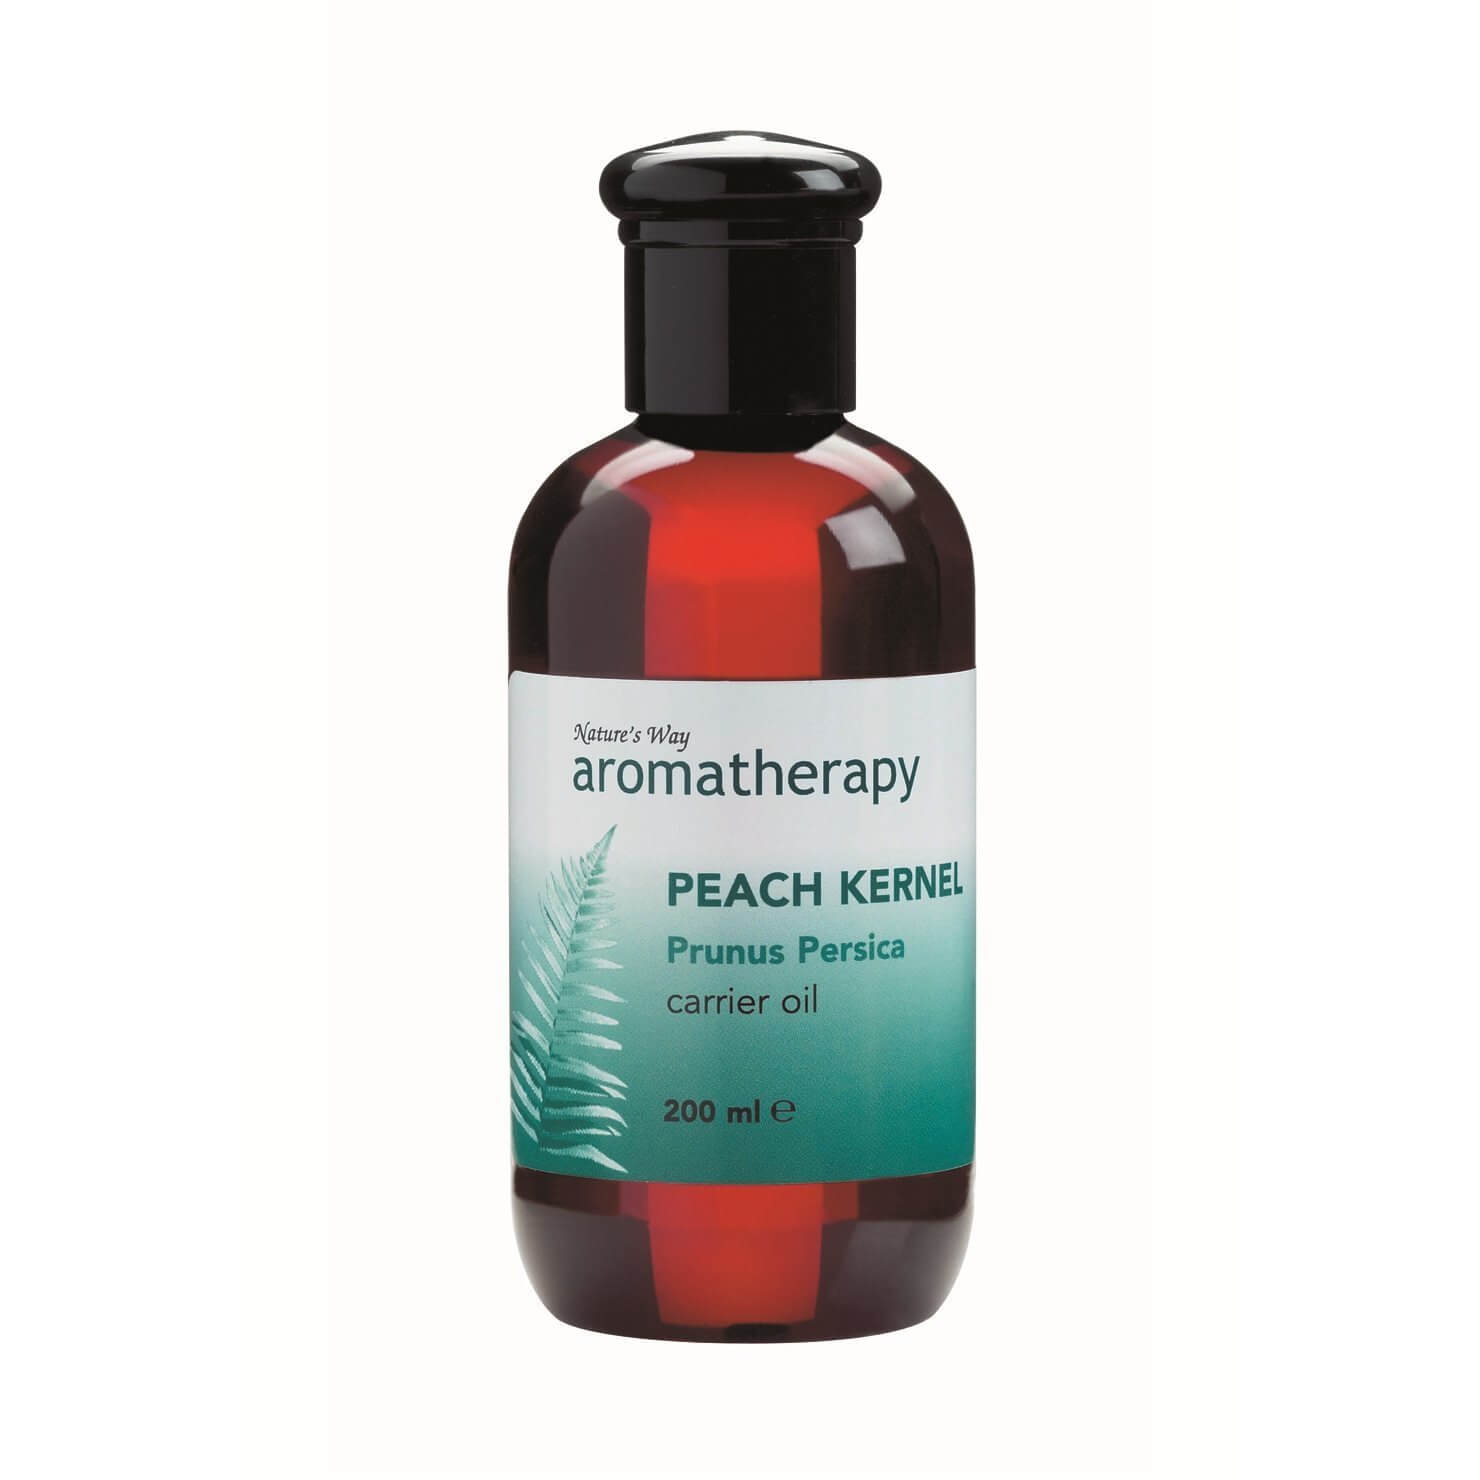 Aromatherapy Oil Natures Way Carrier Oil - Peach Kernel 200ml